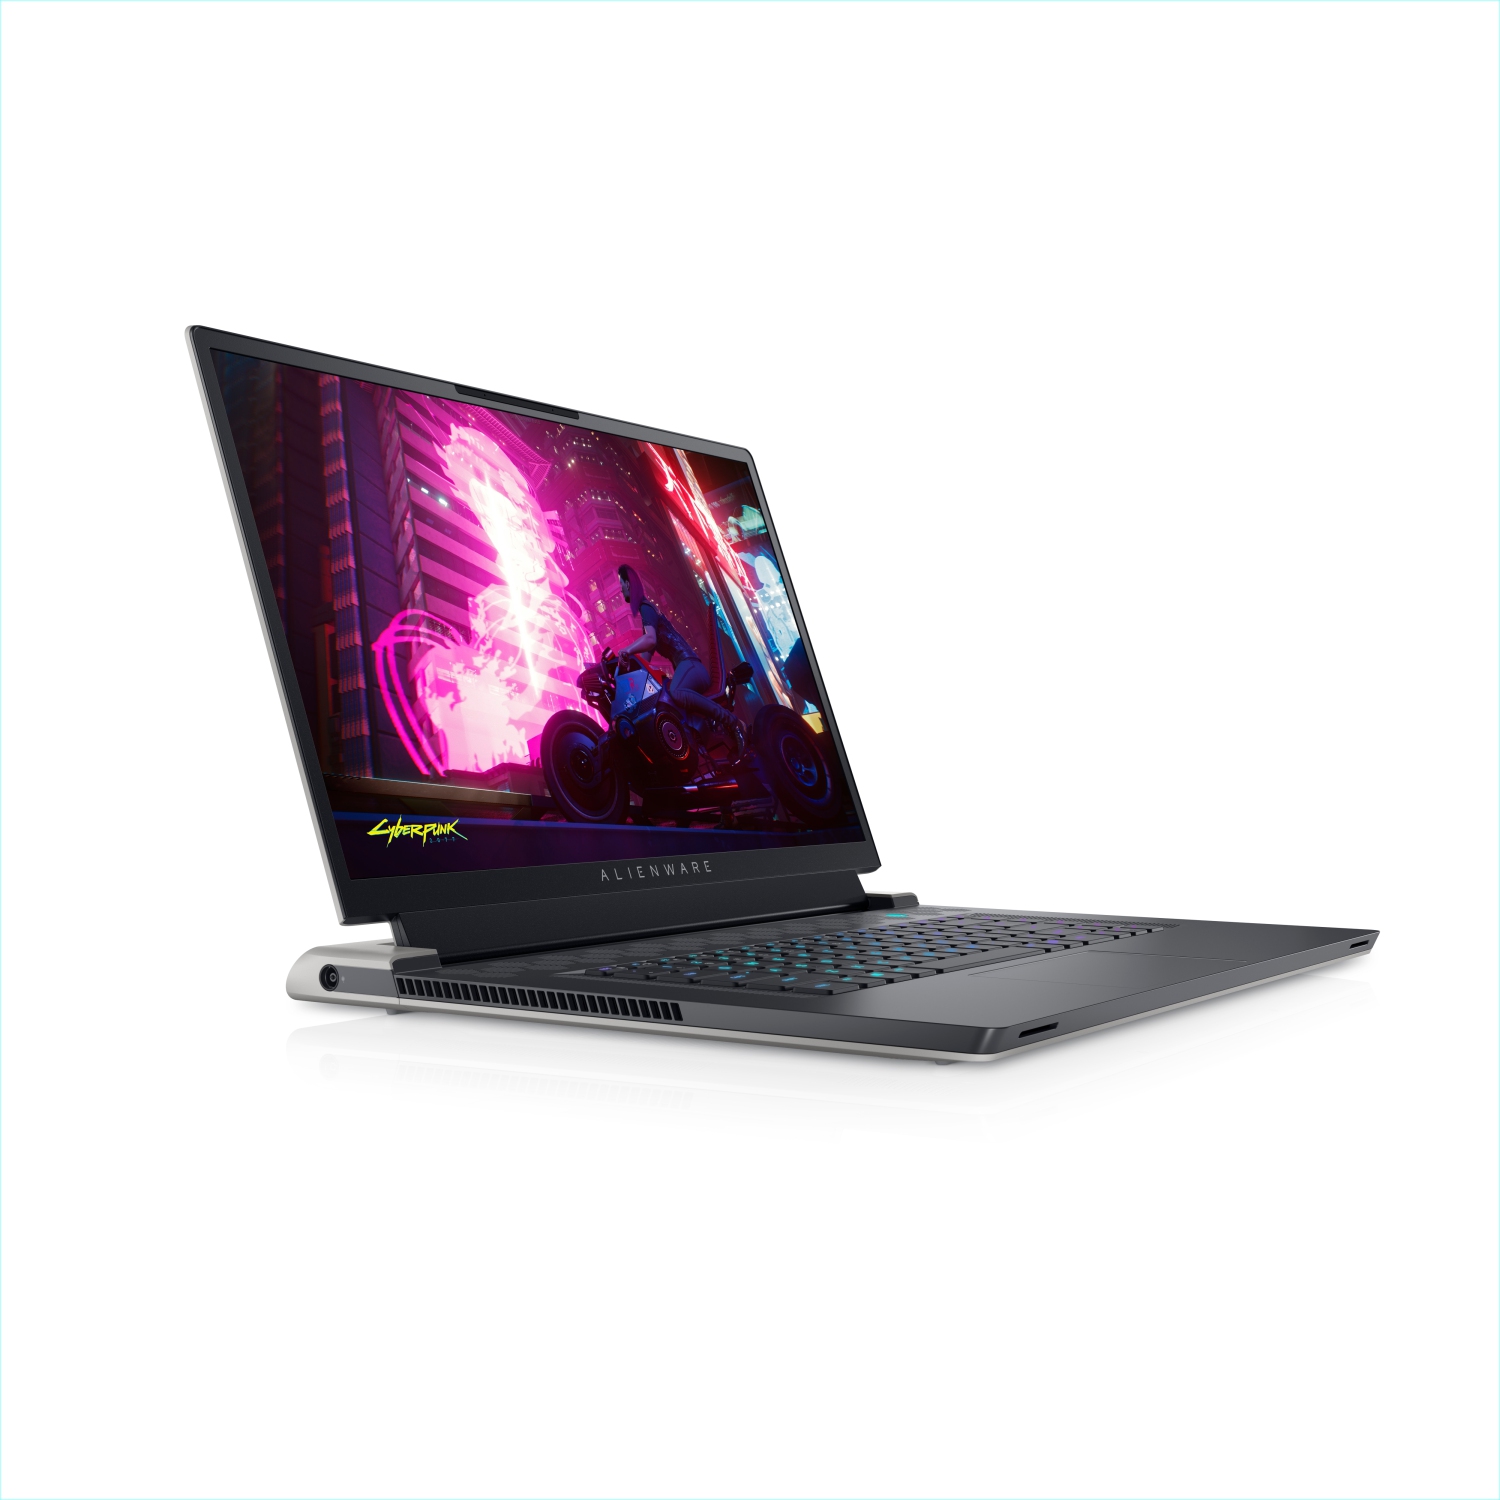 Refurbished (Excellent) - Dell Alienware X17 R1 Gaming Laptop (2021), 17.3" FHD, Core i7, 1TB SSD + 512GB SSD, 32GB RAM, RTX 3080, 4.6 GHz, 11th Gen CPU Certified